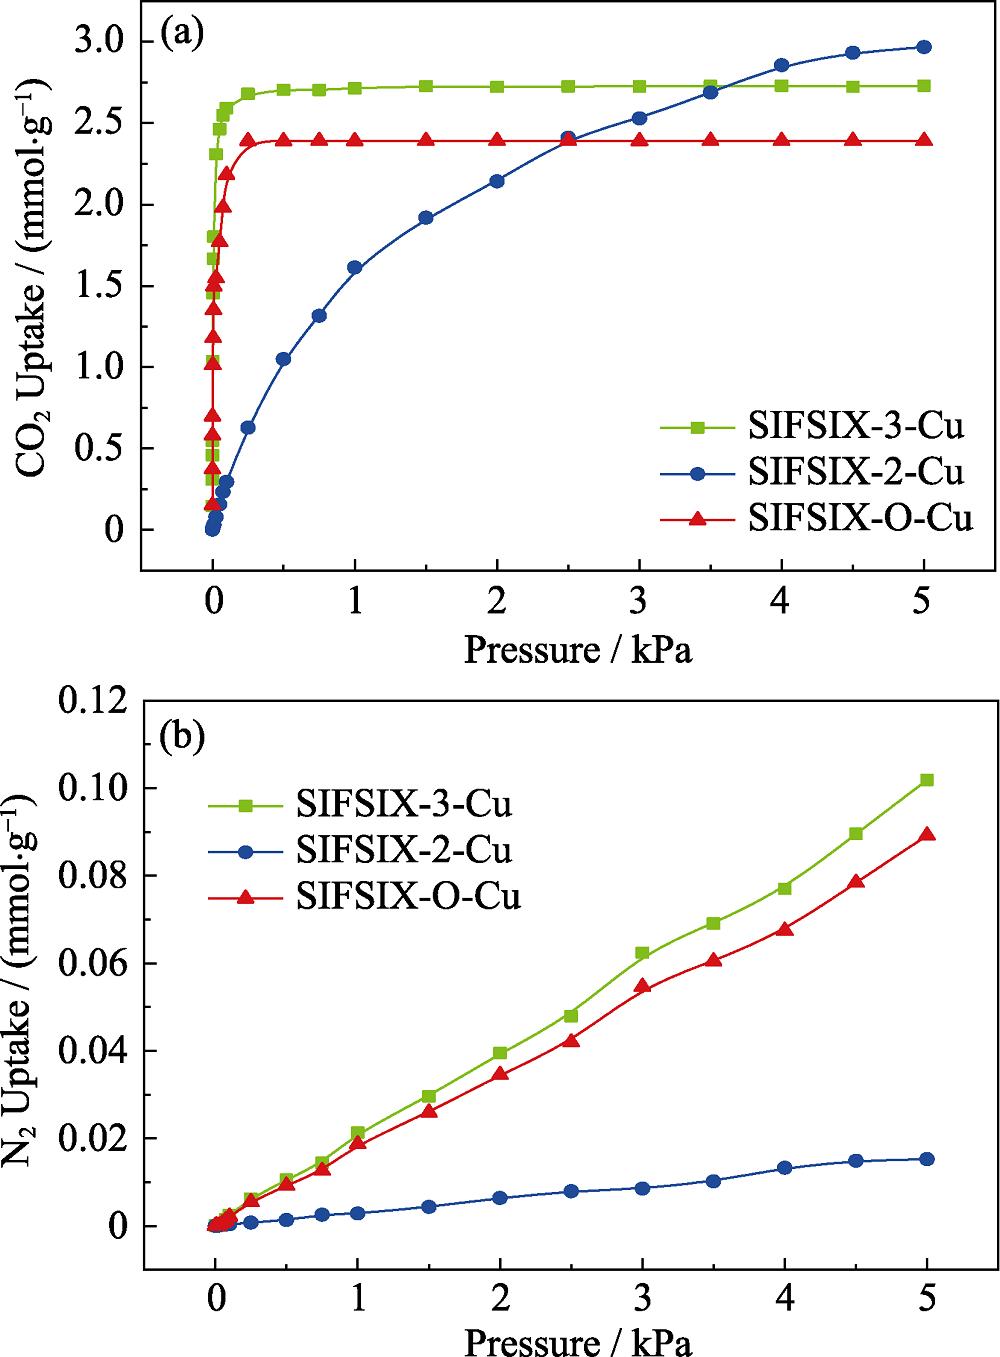 Adsorption isotherms of CO2 (a) and N2 (b) in SIFSIX-X-Cu at 298 K